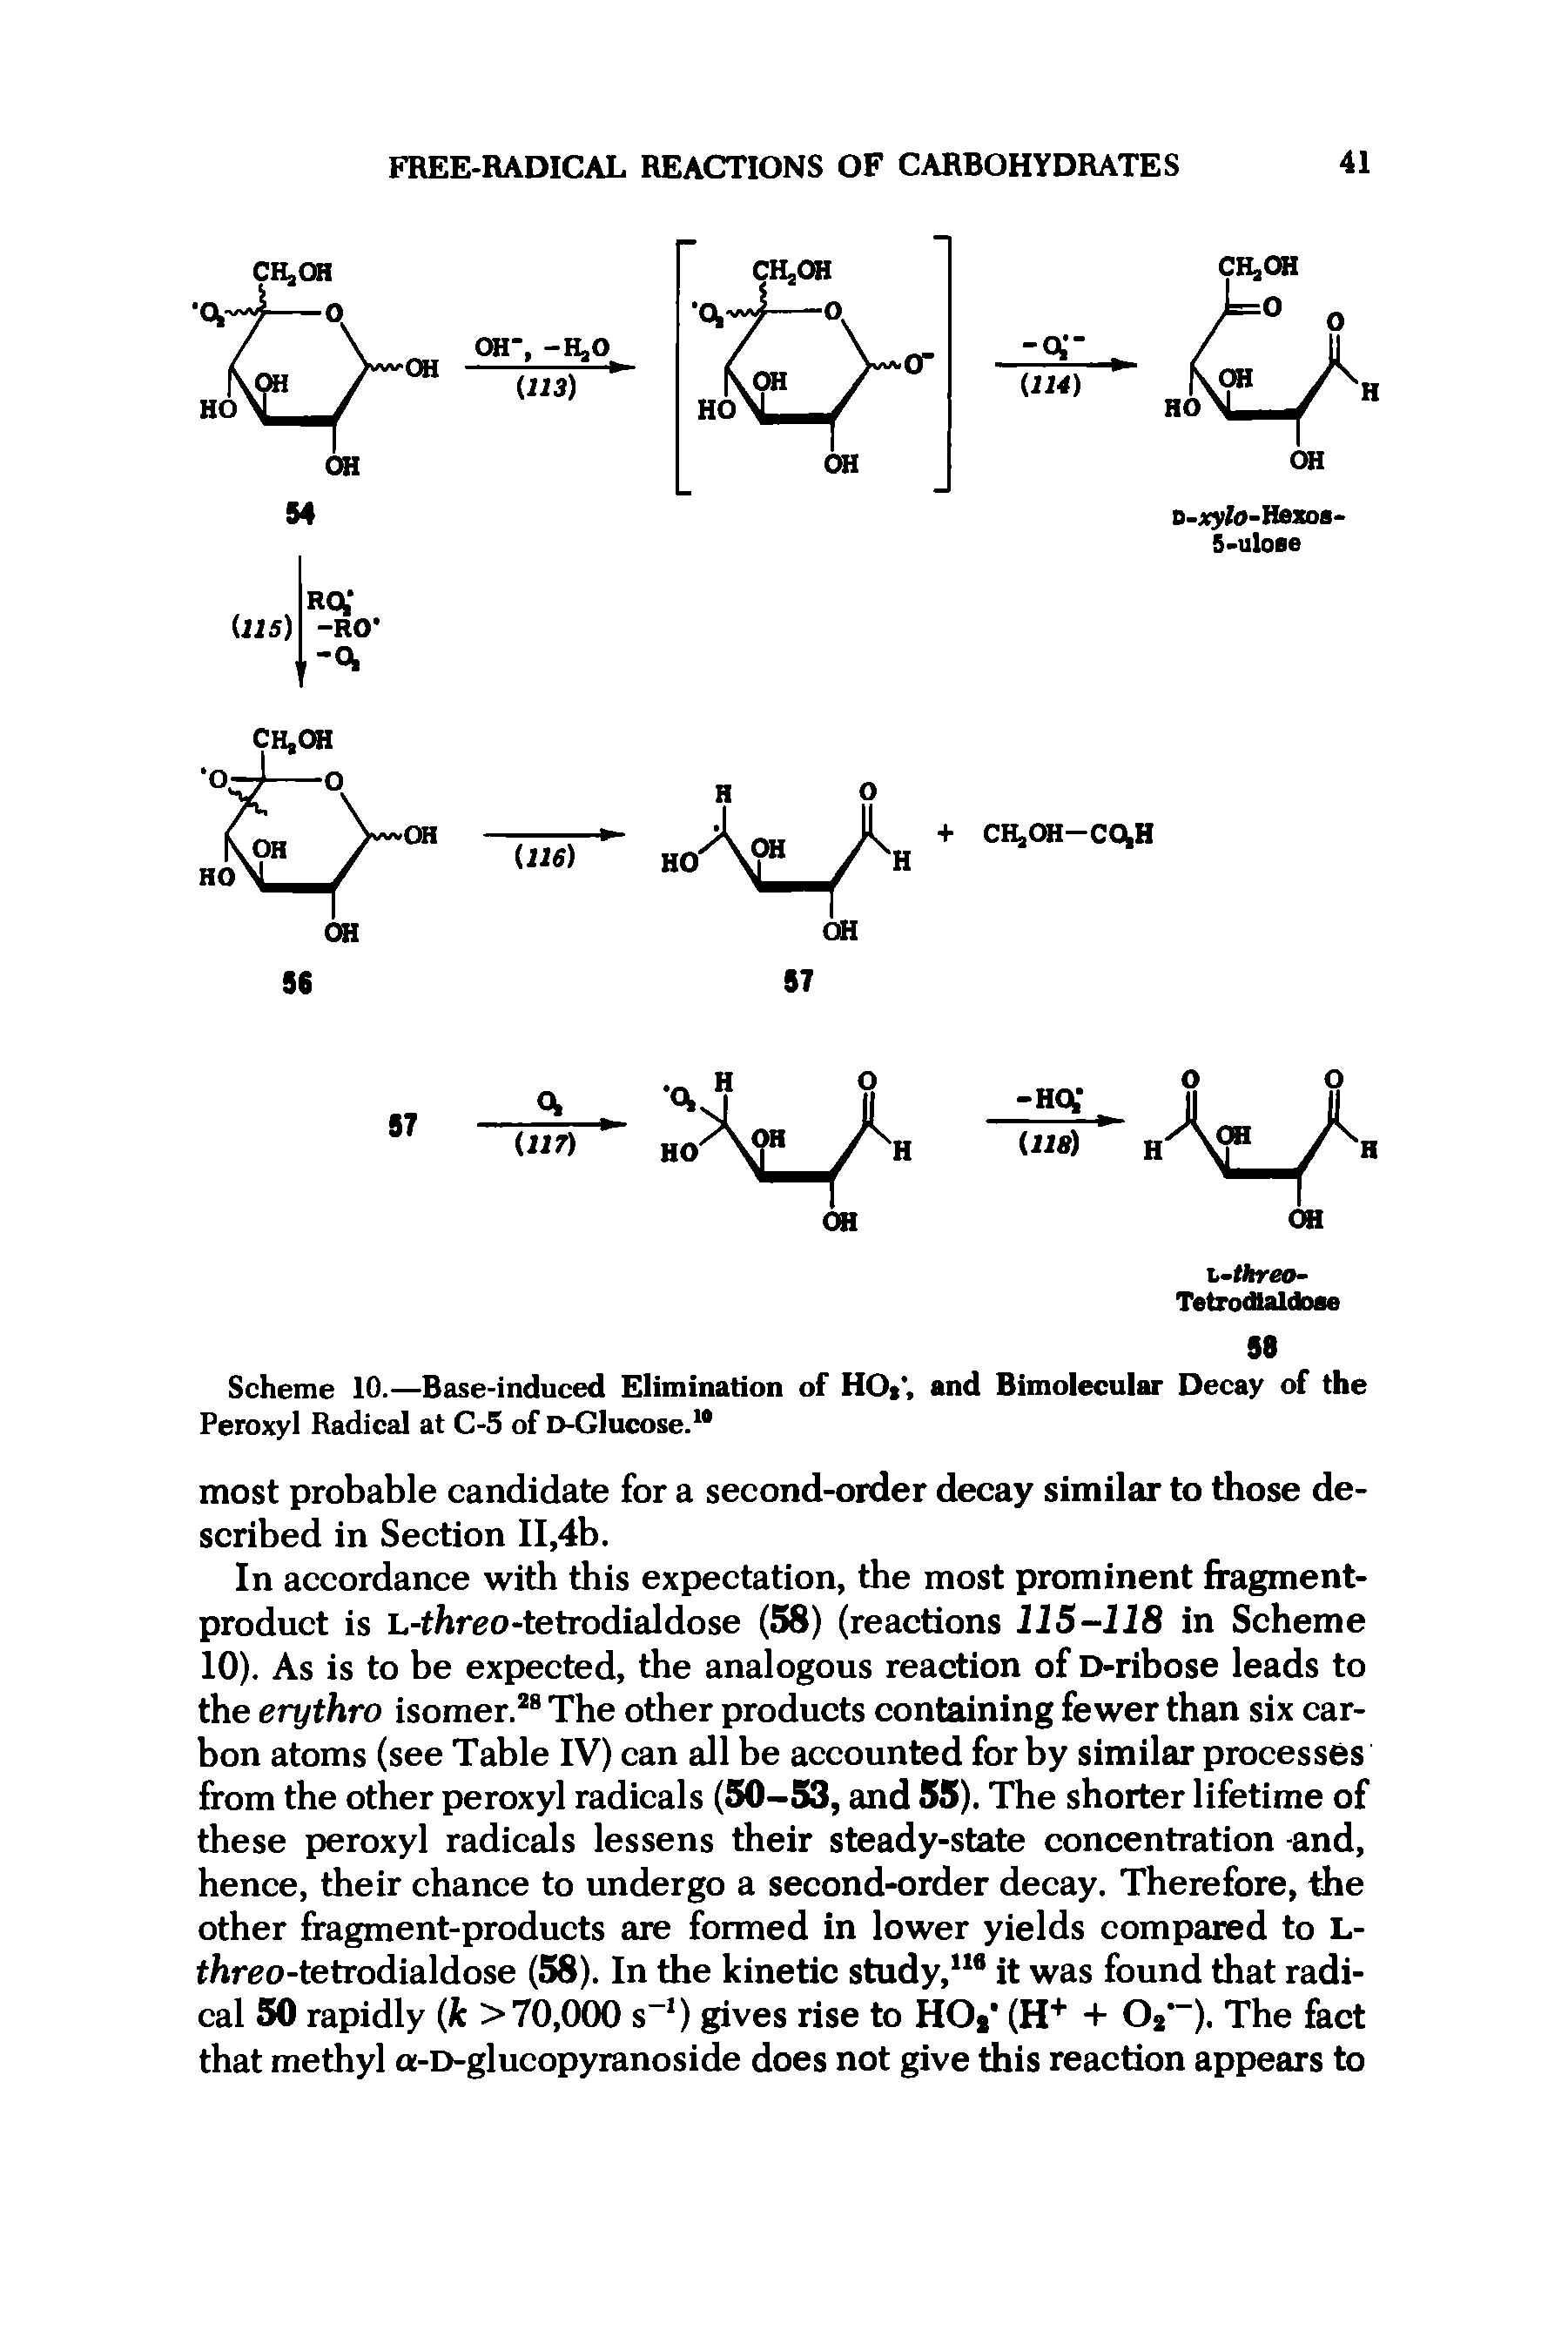 Scheme 10.—Base-induced Elimination of HOt, and Bimolecular Decay of the Peroxyl Radical at C-5 of D-Clucose. ...